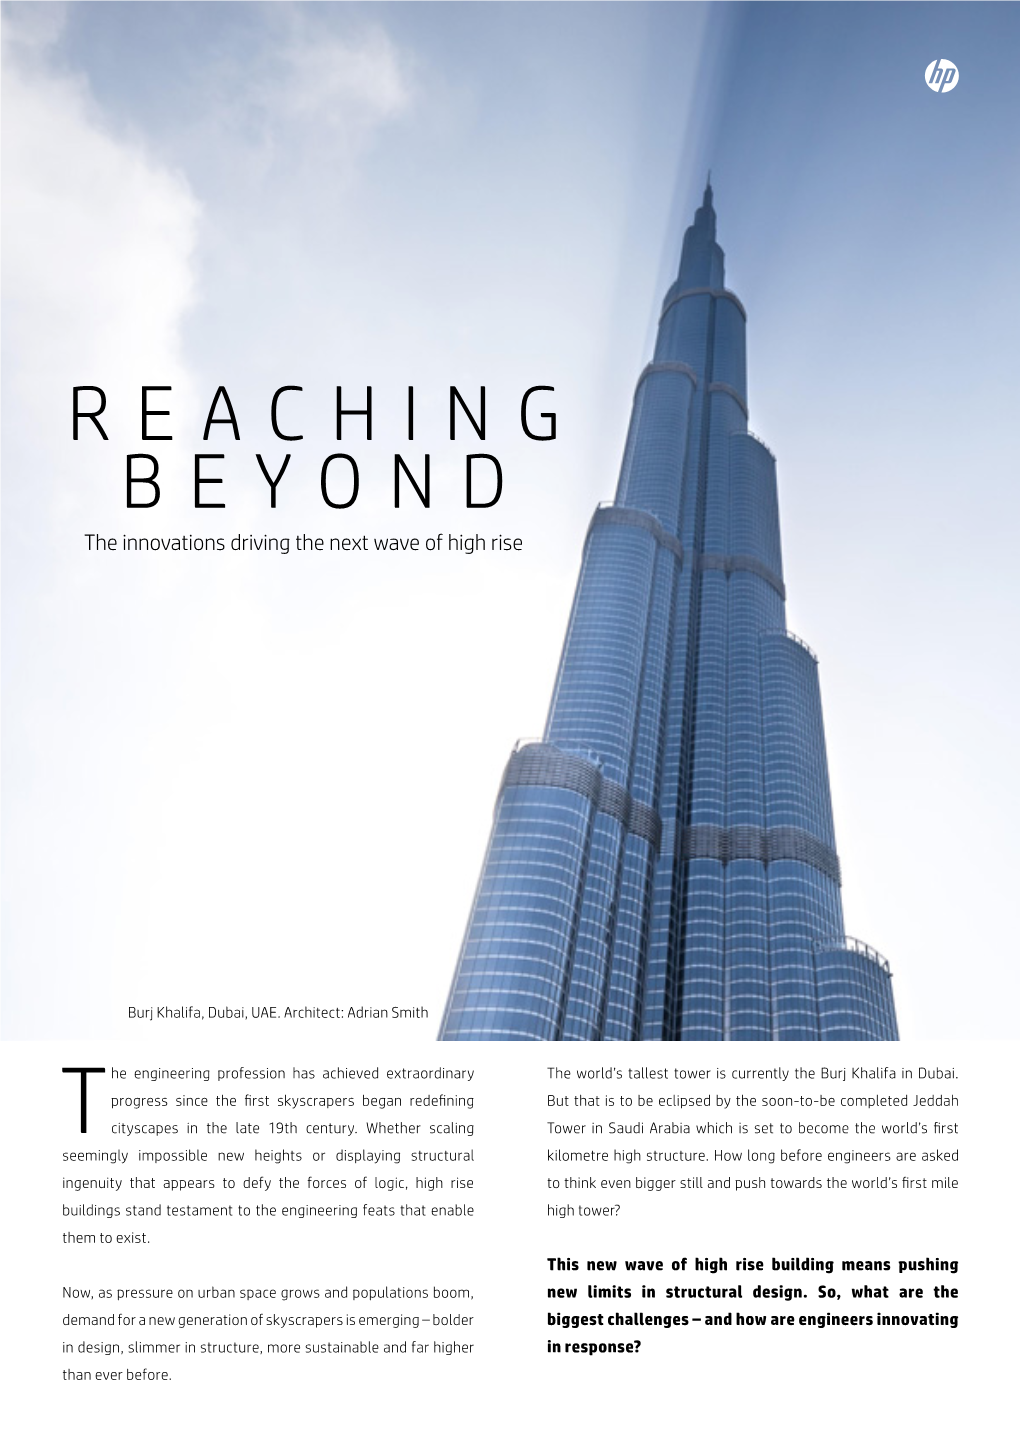 REACHING BEYOND the Innovations Driving the Next Wave of High Rise